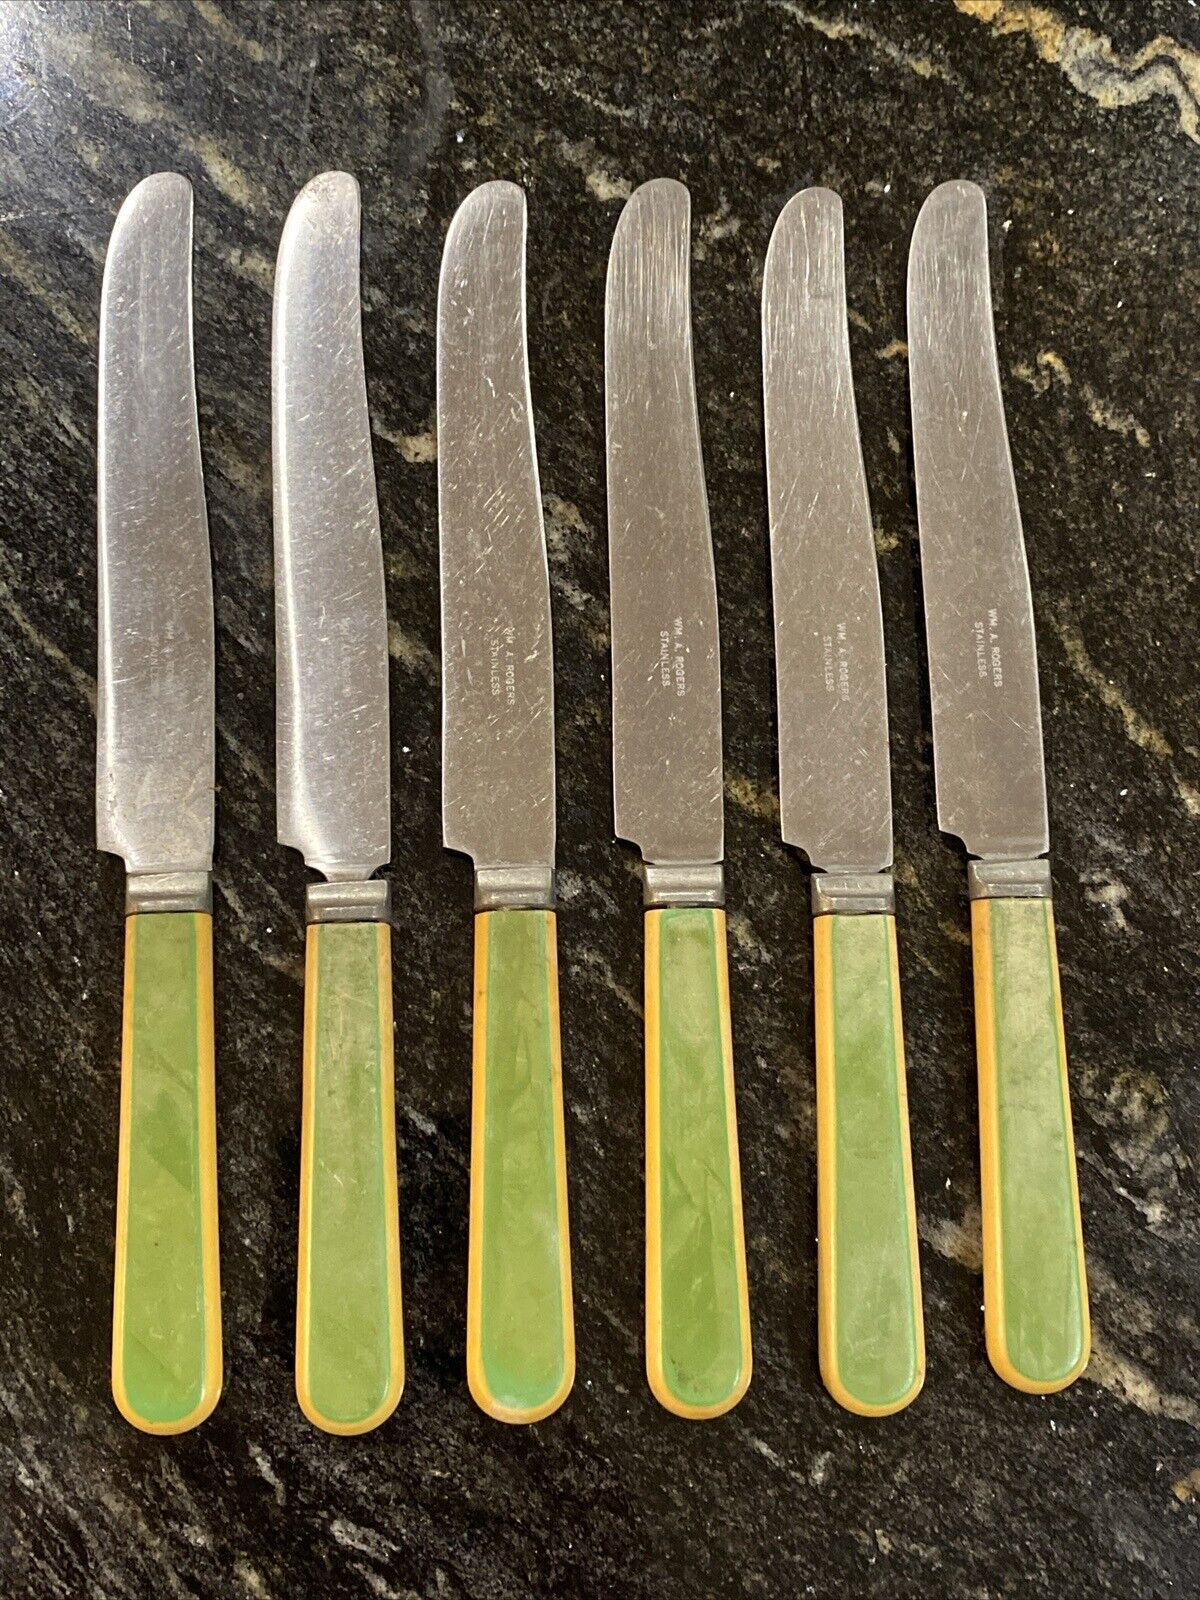 6 William Rogers Celluloid Handle Stainless Steel Butter Dinner Knives Cutlery